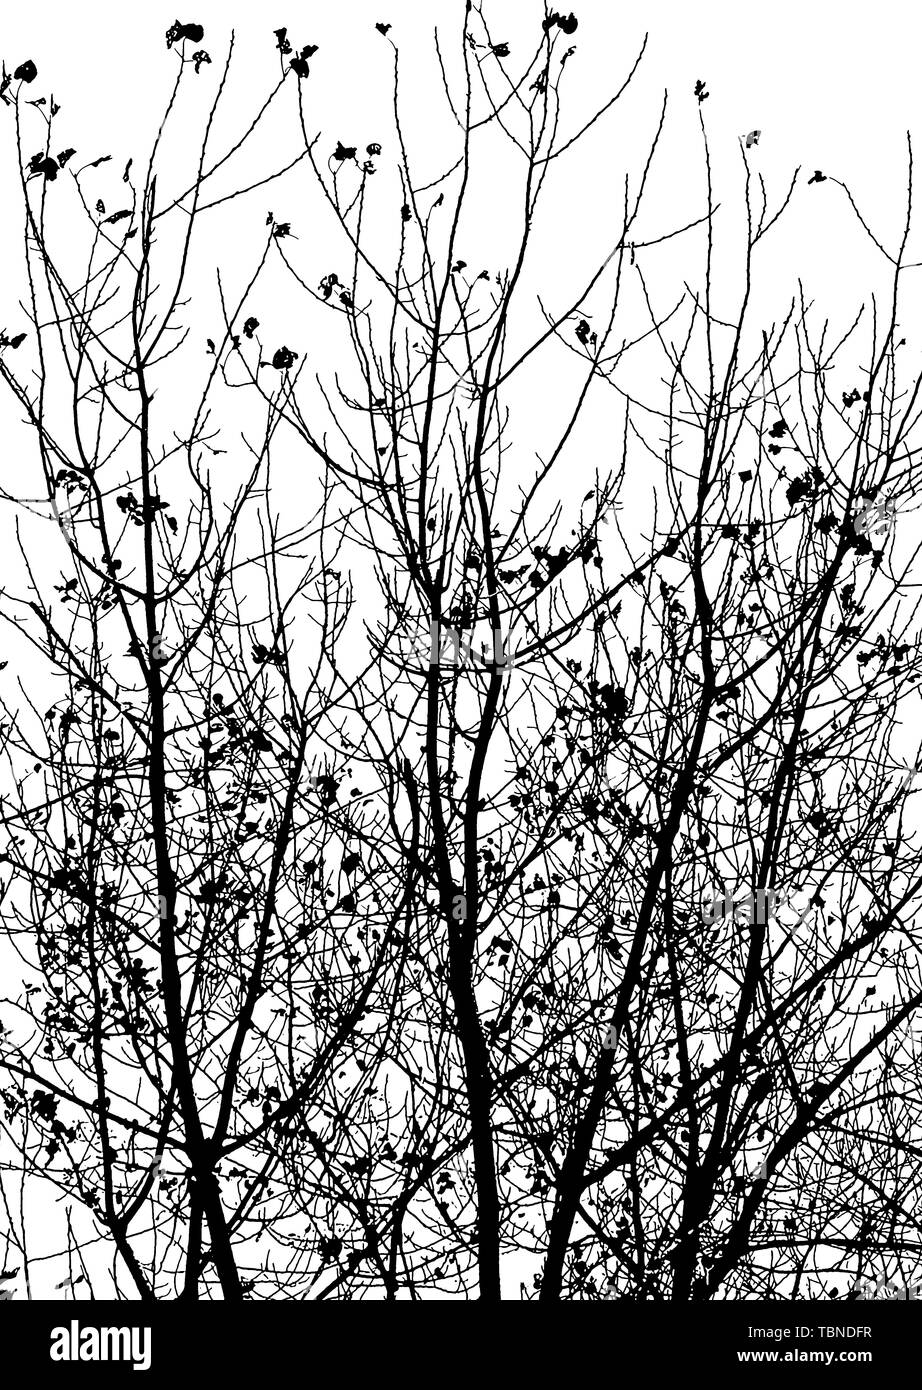 Black and white branches Stock Photo